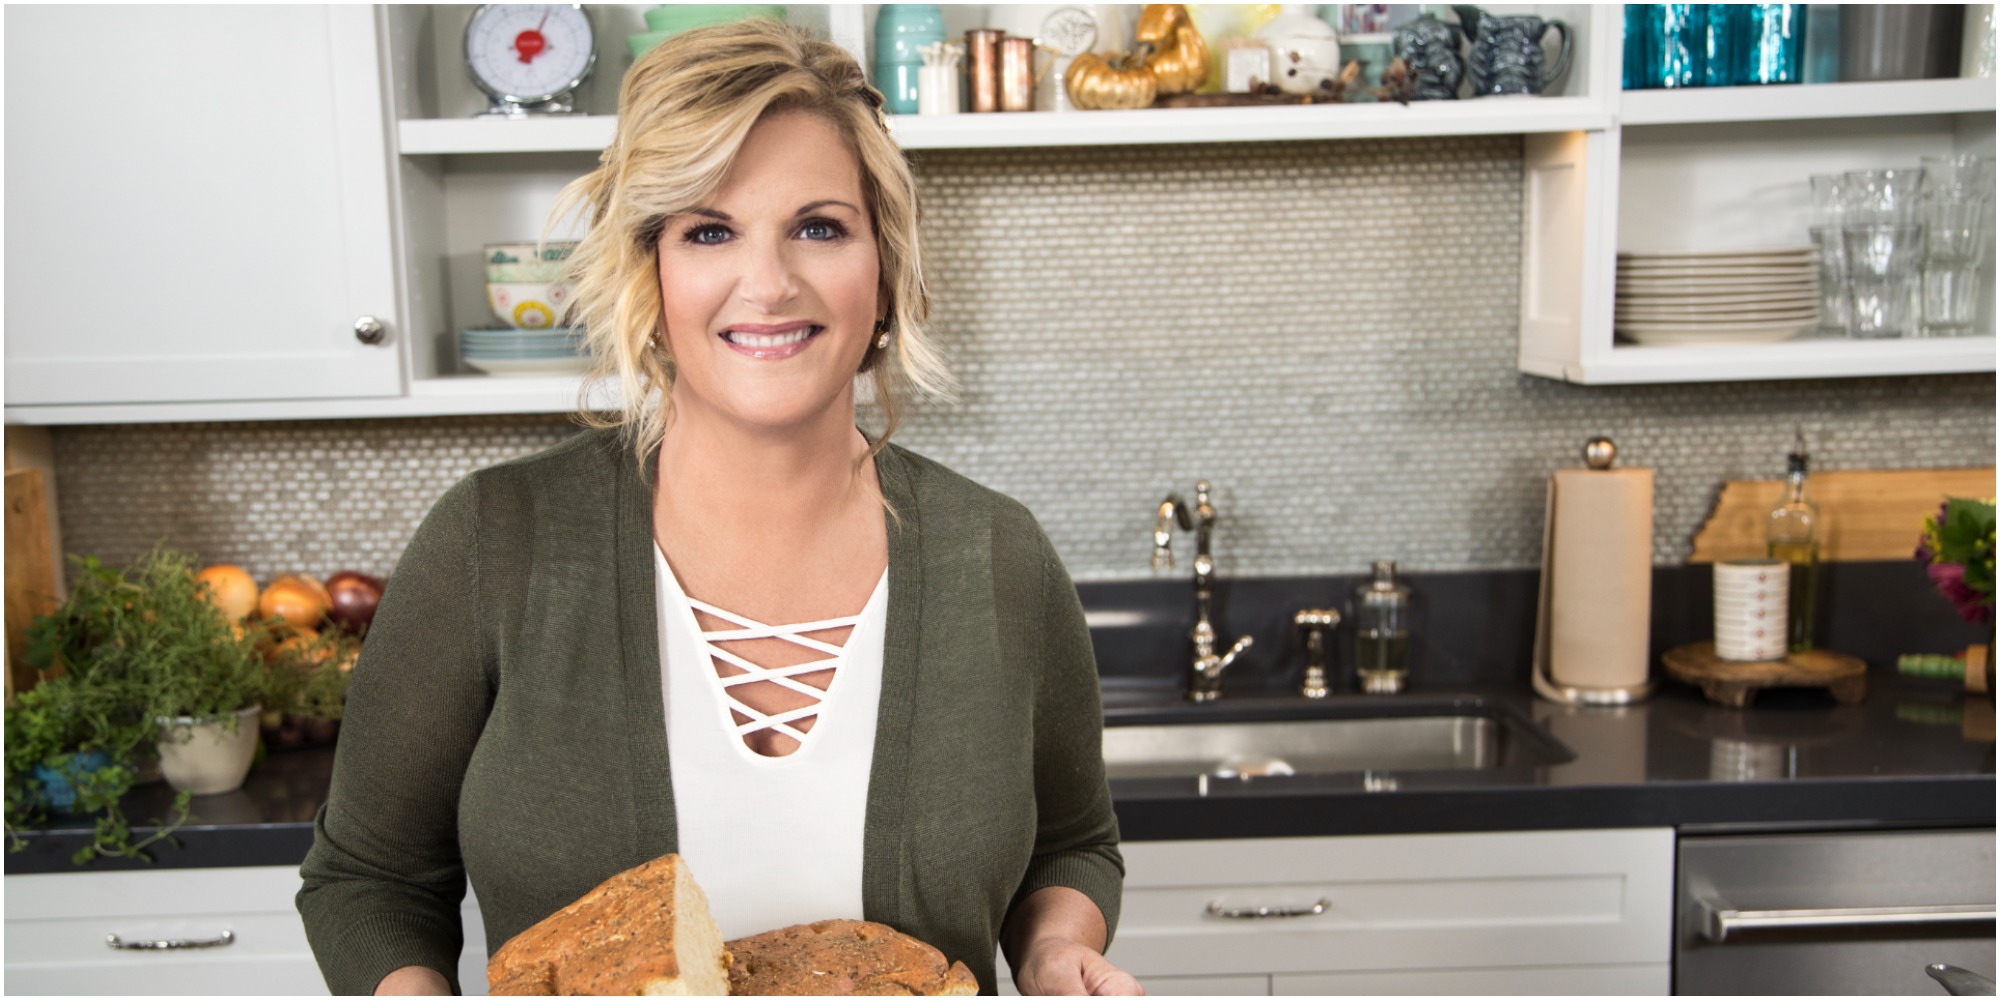 Trisha's Southern Kitchen star Trisha Yearwood's un-fried chicken is an easy weeknight meal.